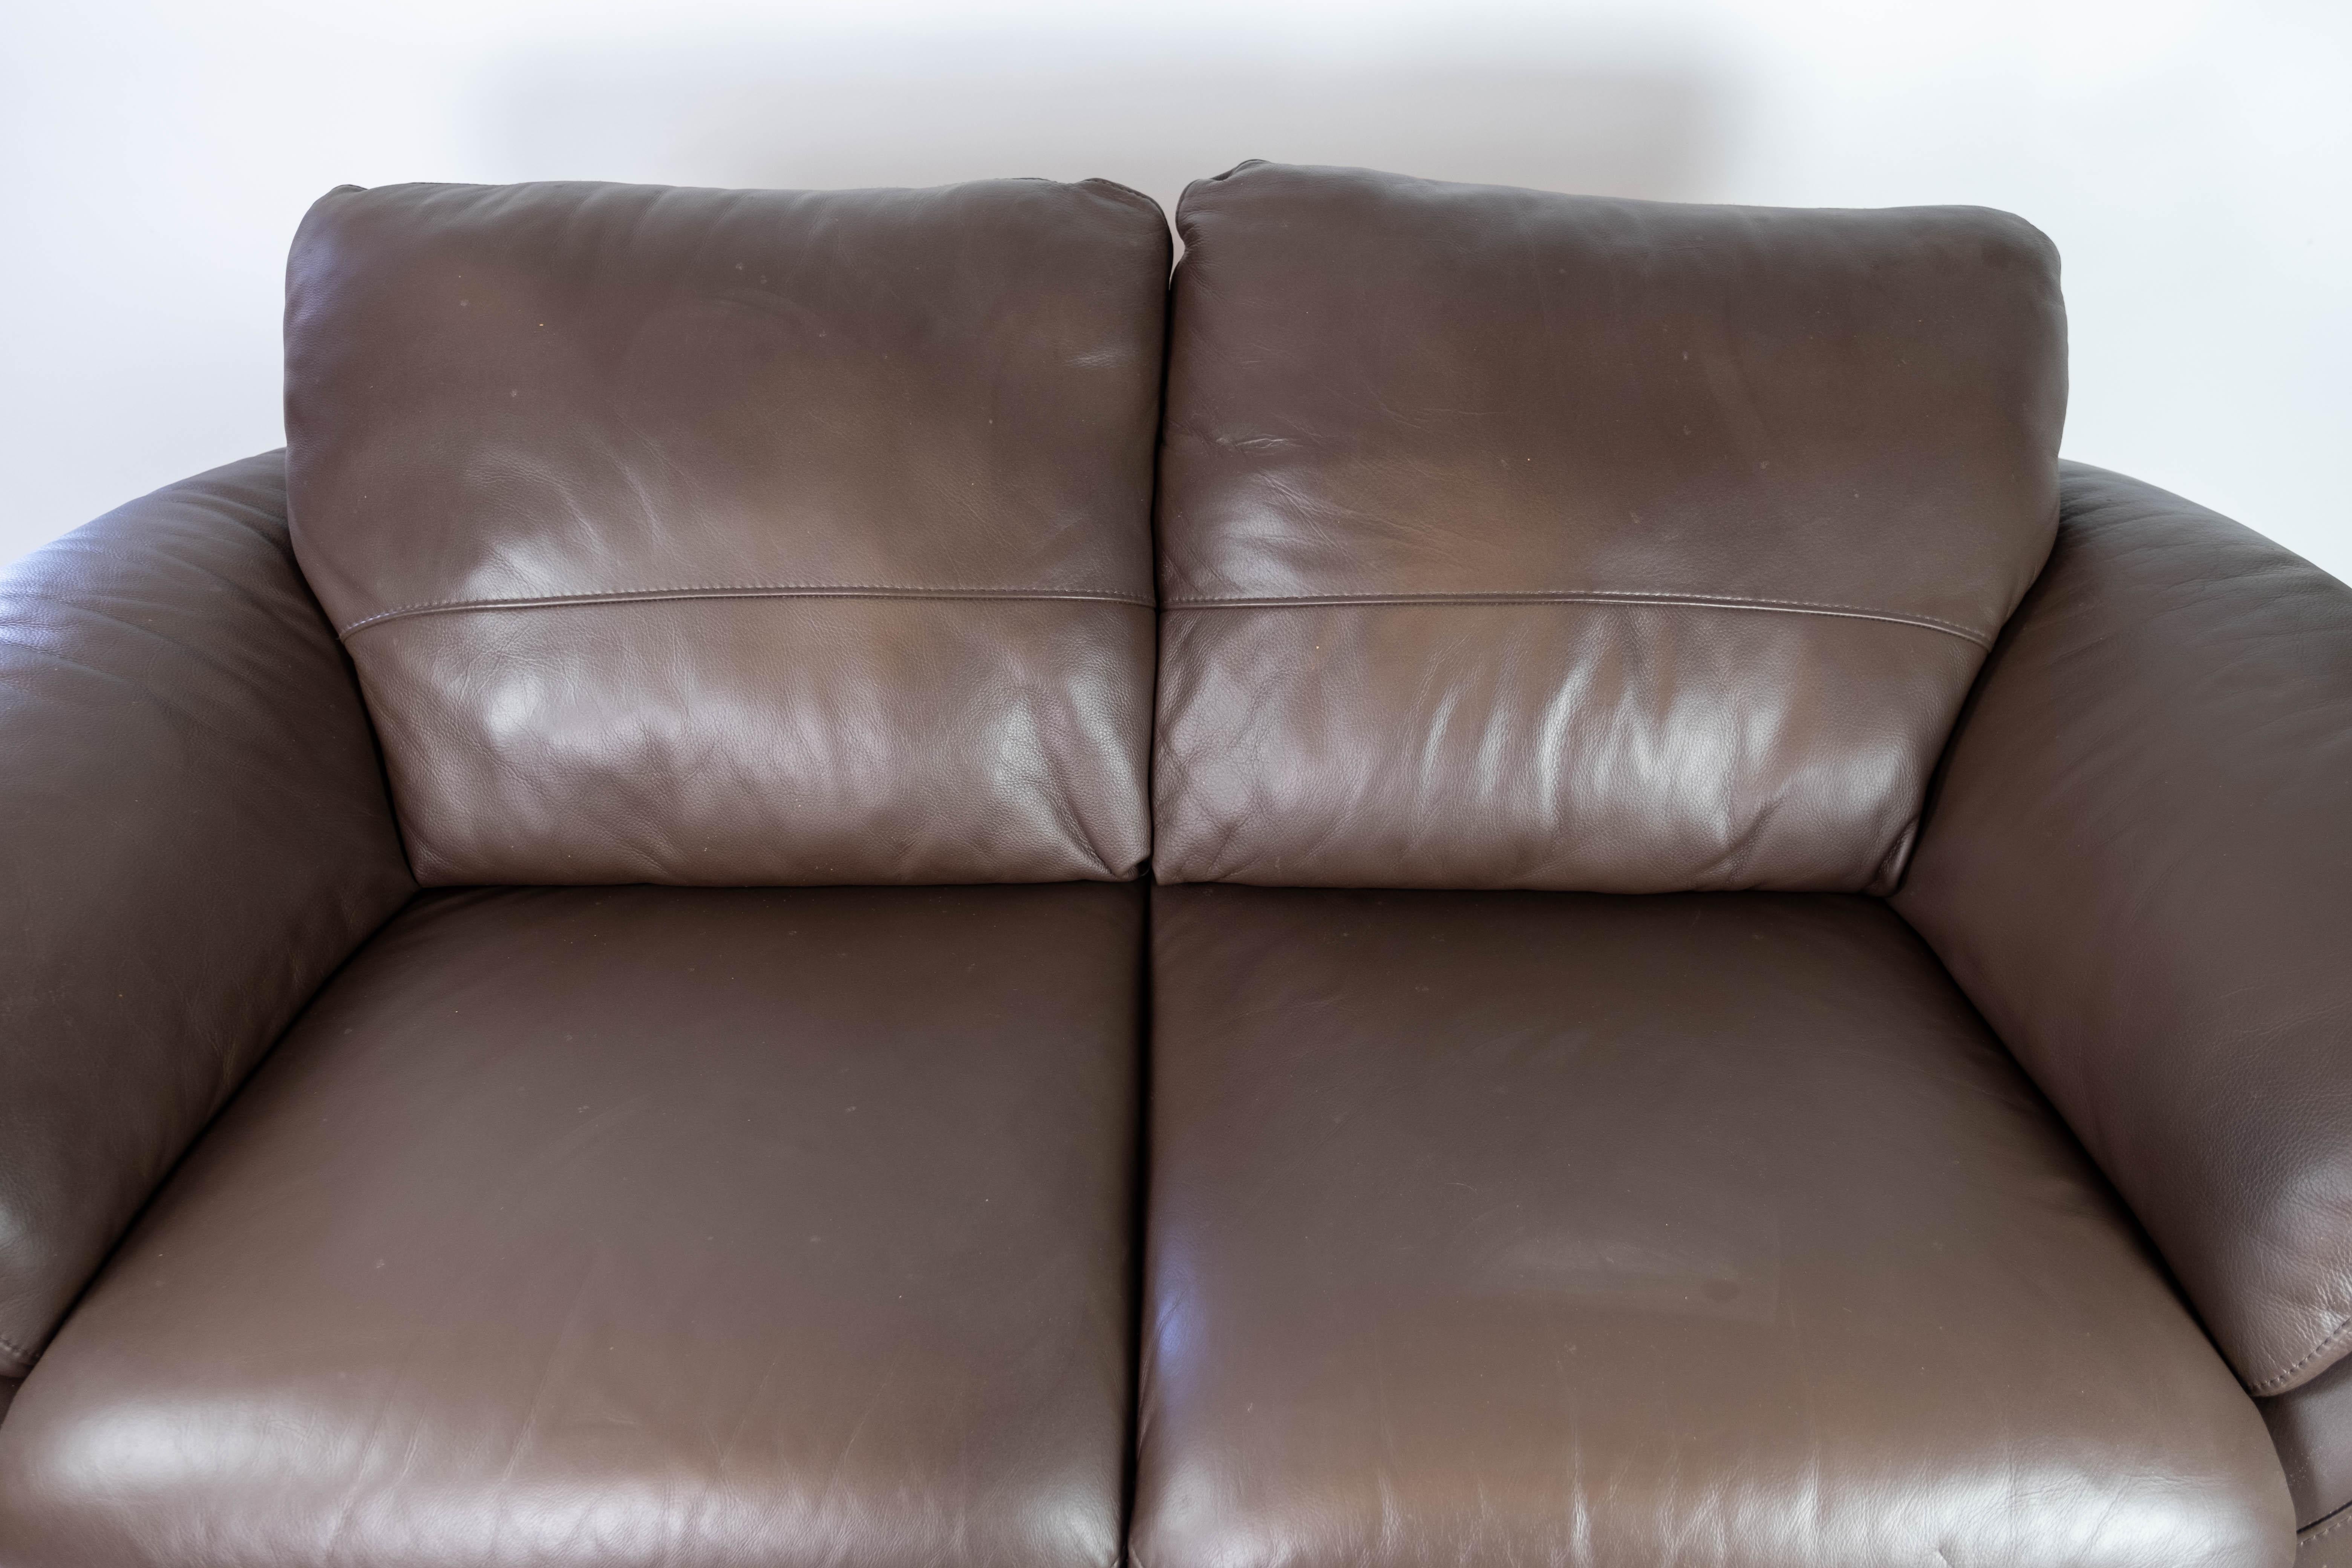 Other Two Seater Sofa Upholstered with Brown Leather and Frame of Metal, by Italsofa